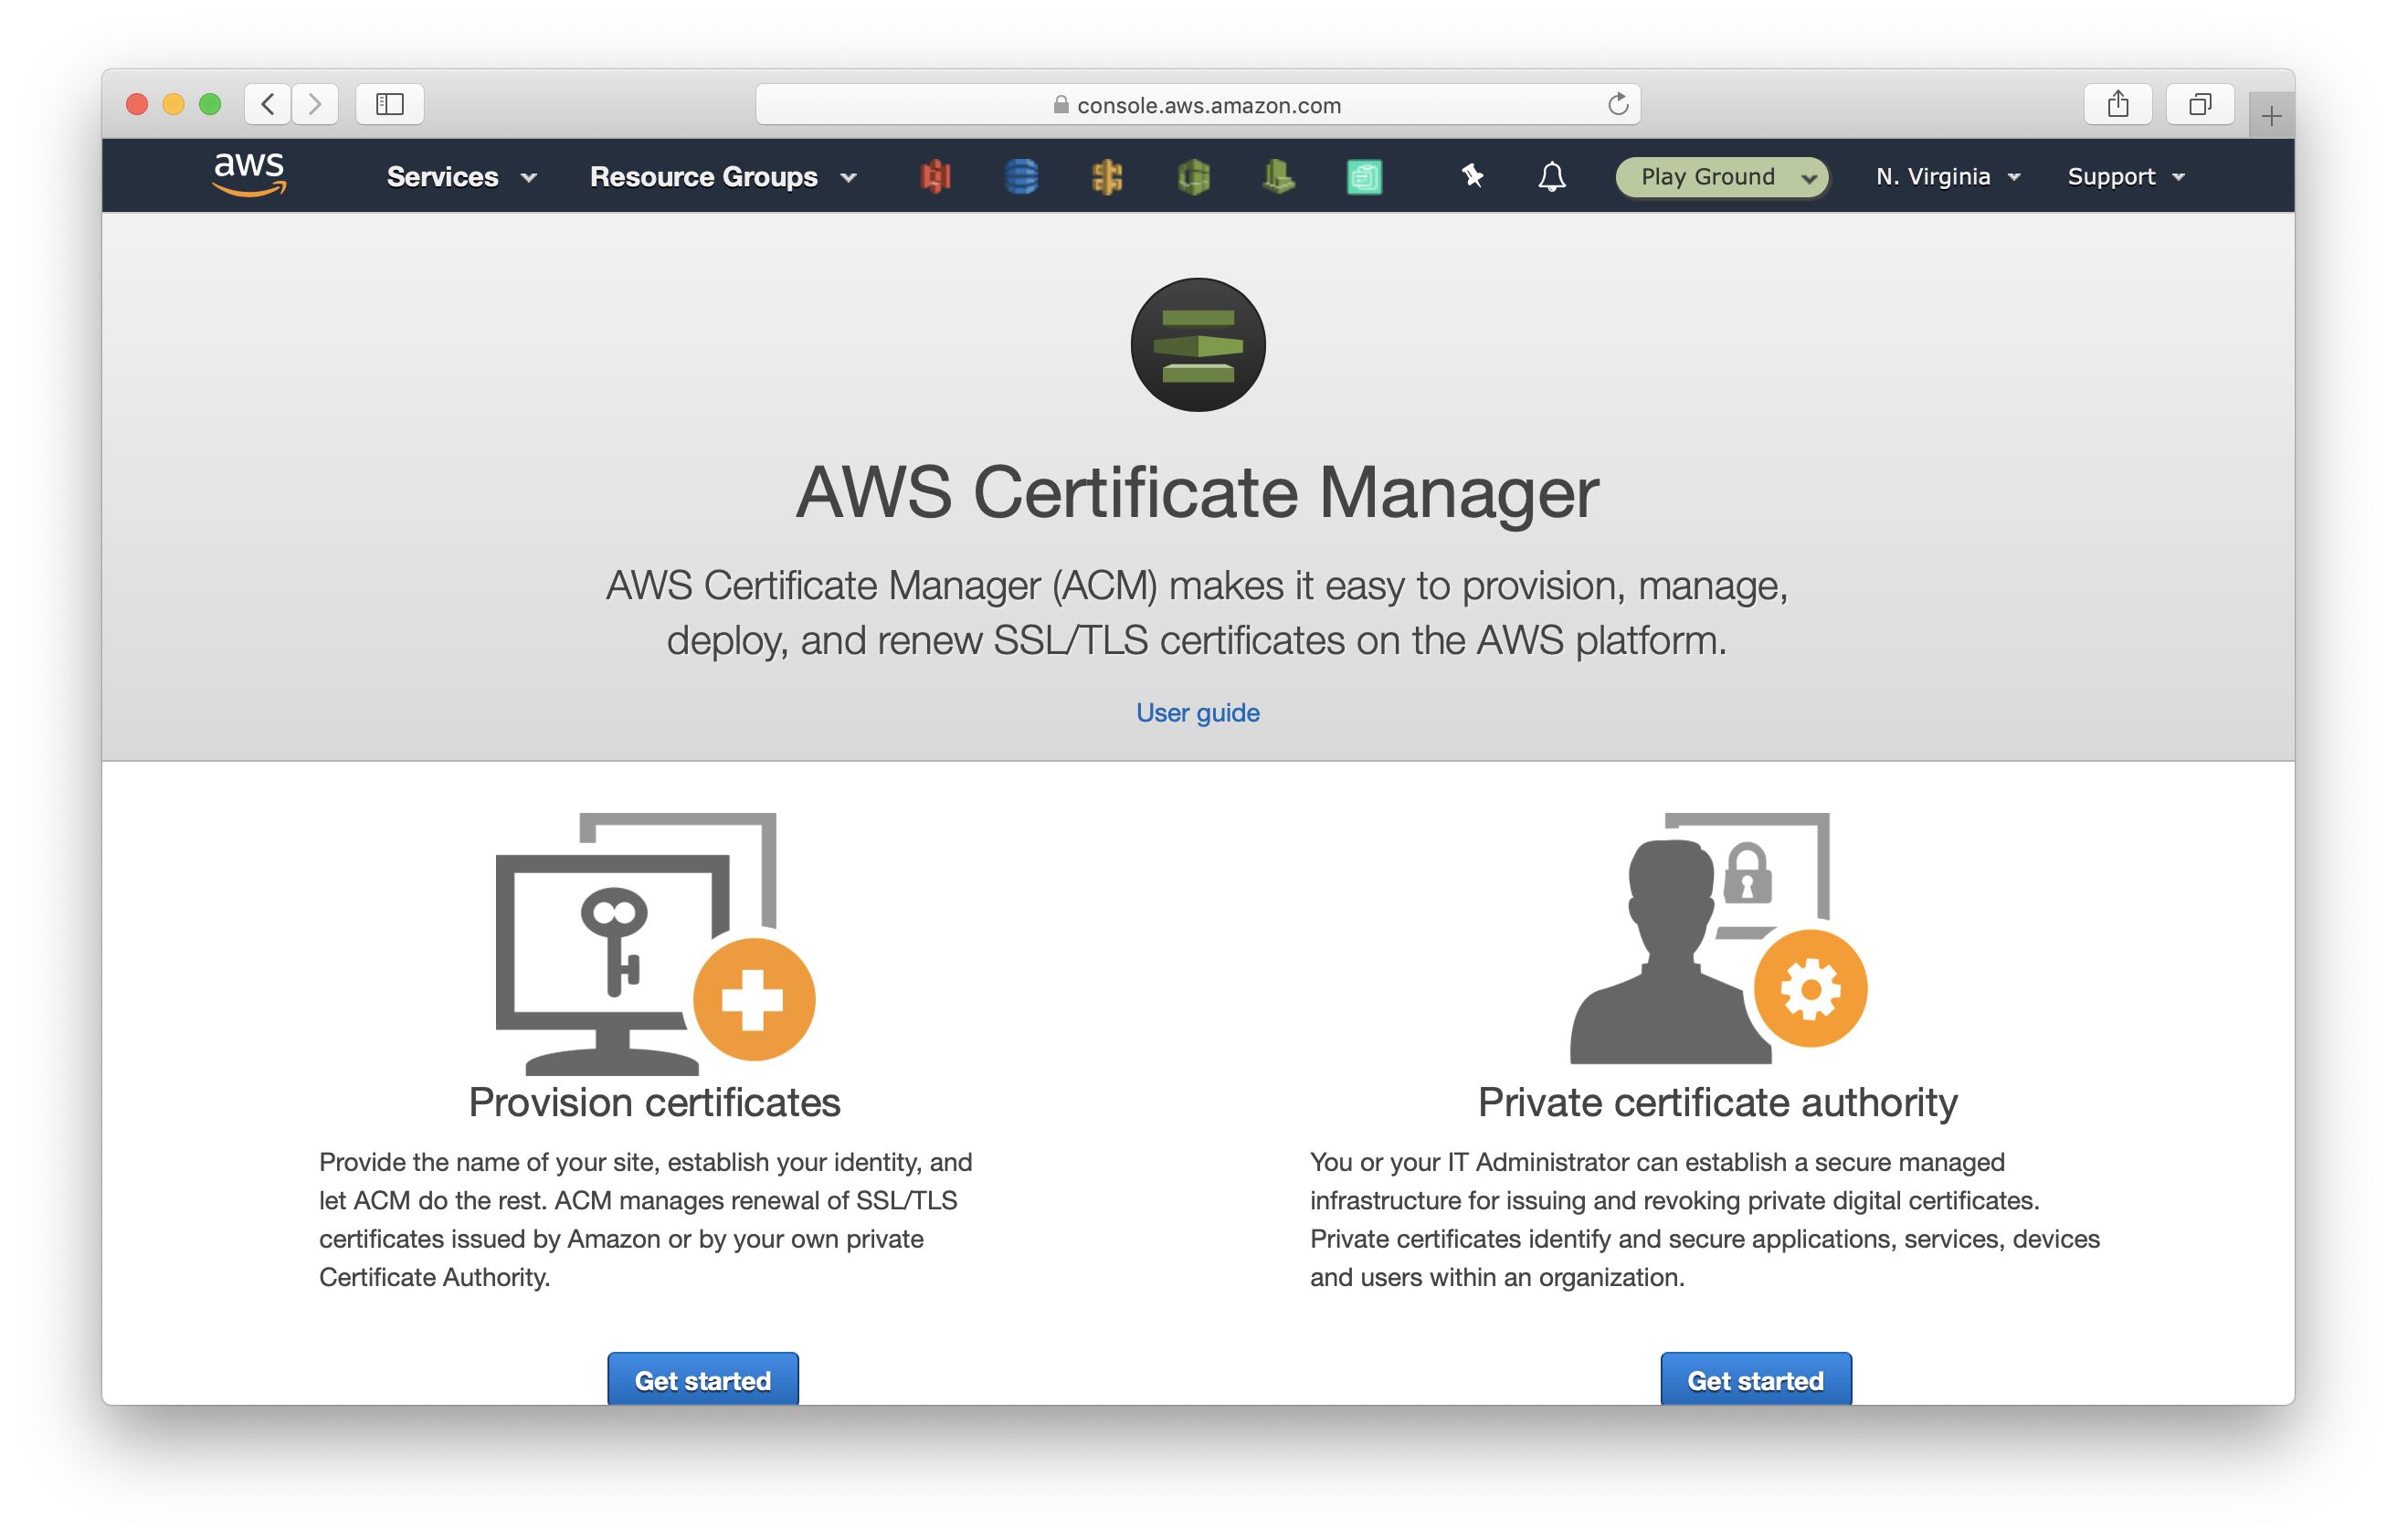 Click Provision certificates in Certificate Manager